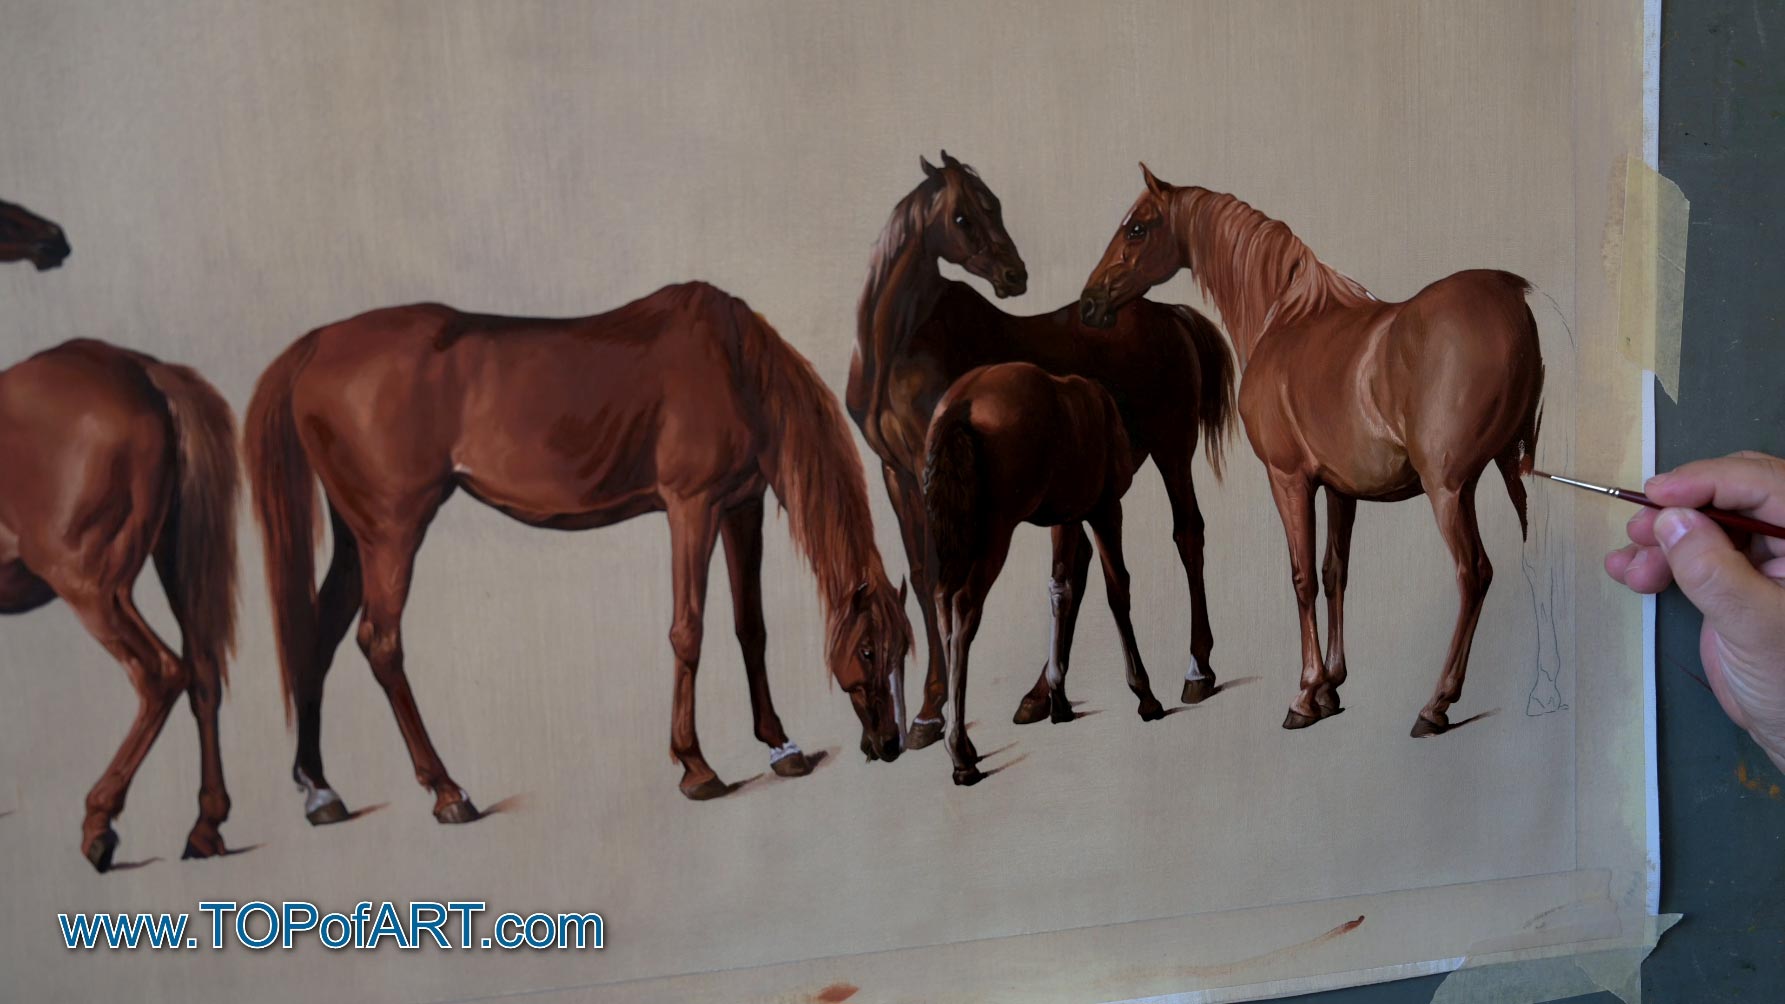 George Stubbs - "Mares and Foals without a Background" - Process of Creation of the Painting